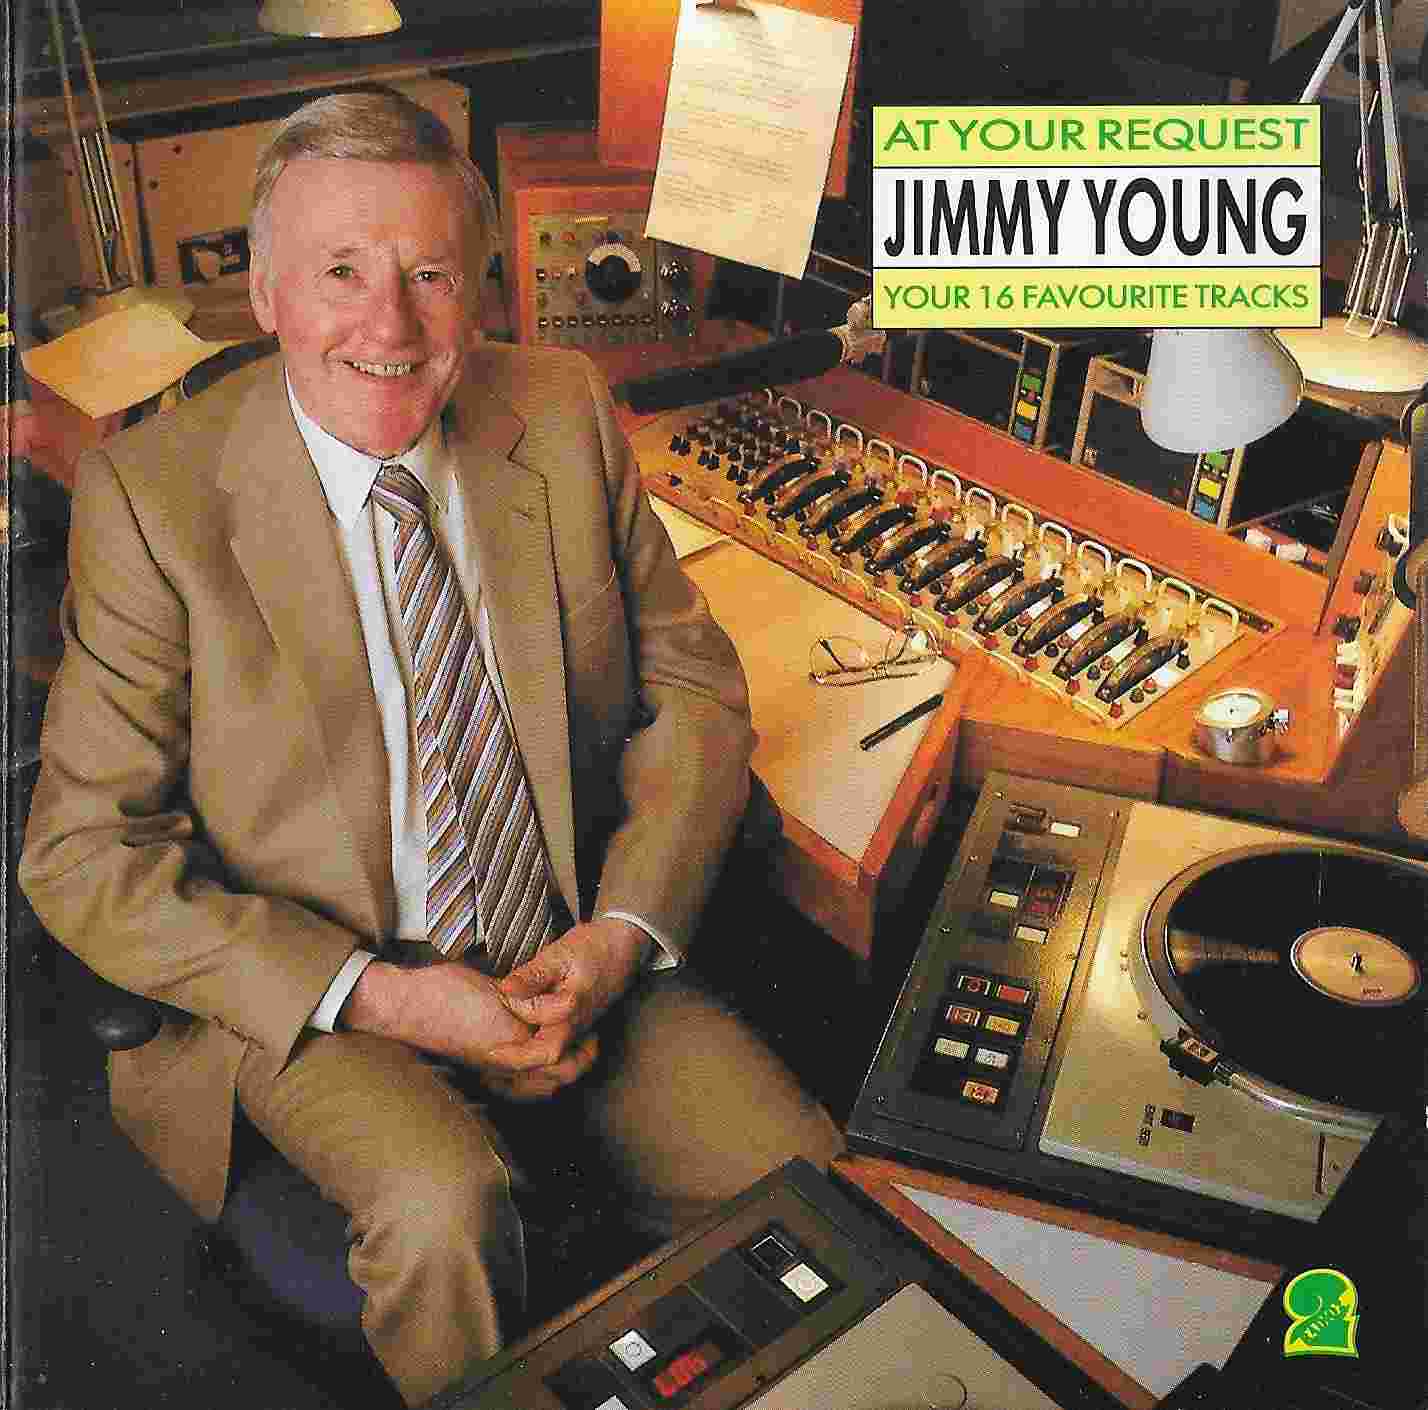 Picture of BBCCD712 At your request - Jimmy Young by artist Jimmy Young from the BBC cds - Records and Tapes library